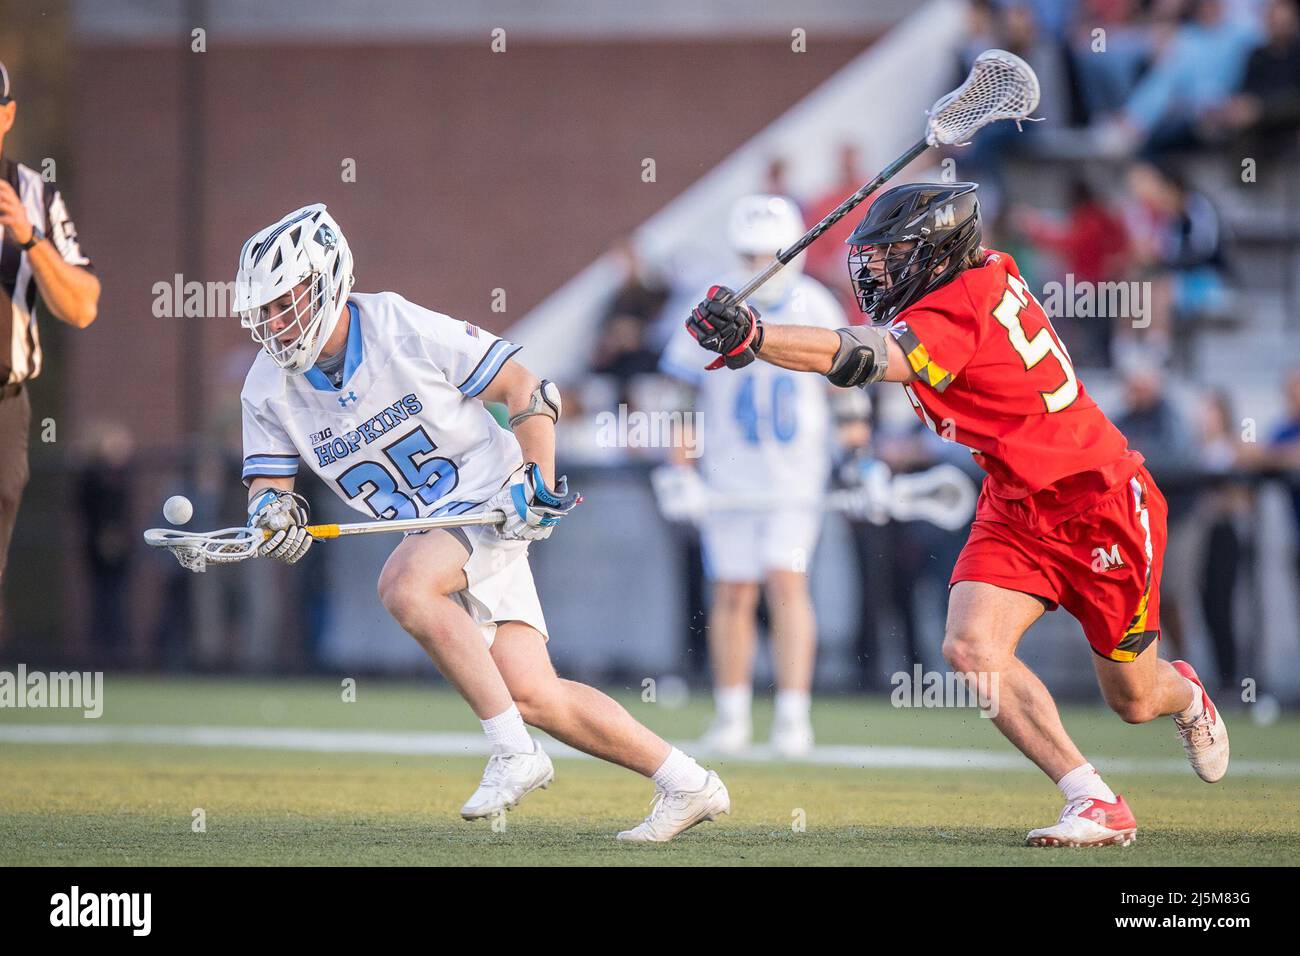 April 23, 2022: Maryland midfielder Jack Brennan (41) attacks the net and scores with Johns Hopkins defender/midfielder Brett Martin (12) on defense during the ncaa men's lacrosse regular season finale between the Maryland Terrapins and the Johns Hopkins Blue Jays at Homewood Field in Baltimore, Maryland Photographer: Cory Royster Stock Photo